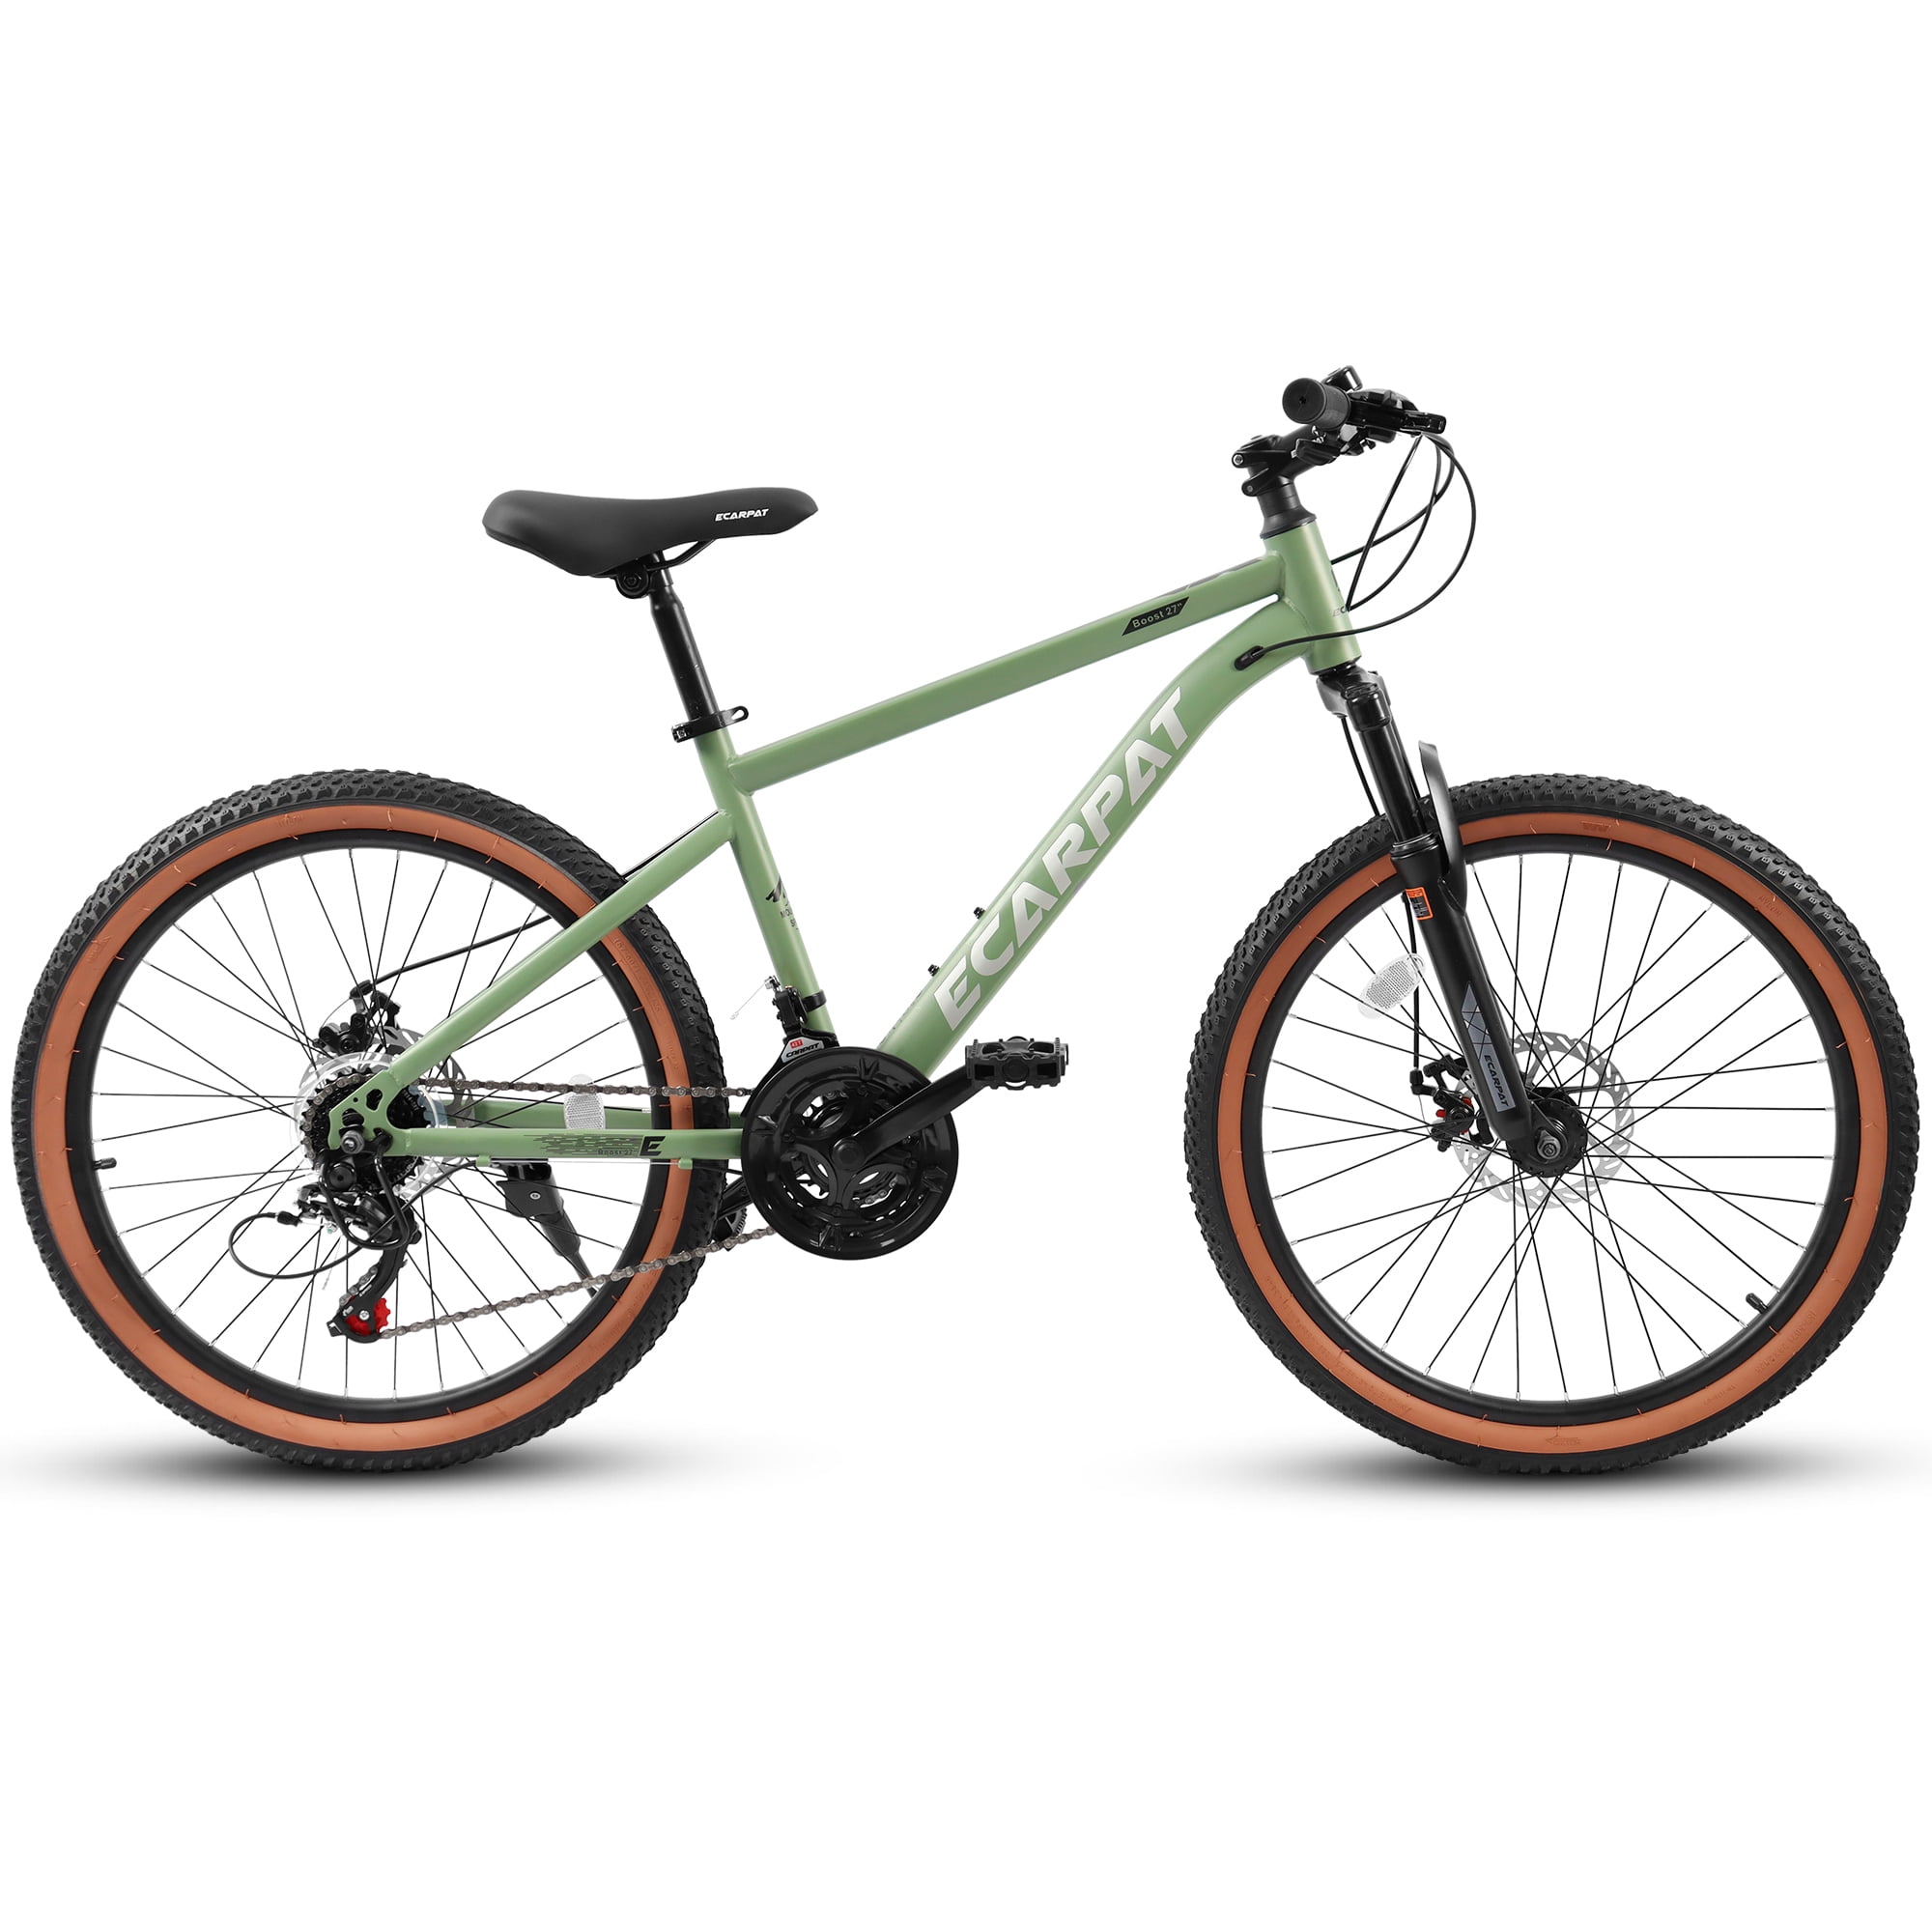 FFOMO 27.5 inch Mountain Bike, 21-Speed Commuter Bike, Disc Brakes, Thumb Shifter Front Fork Bicycles - Green